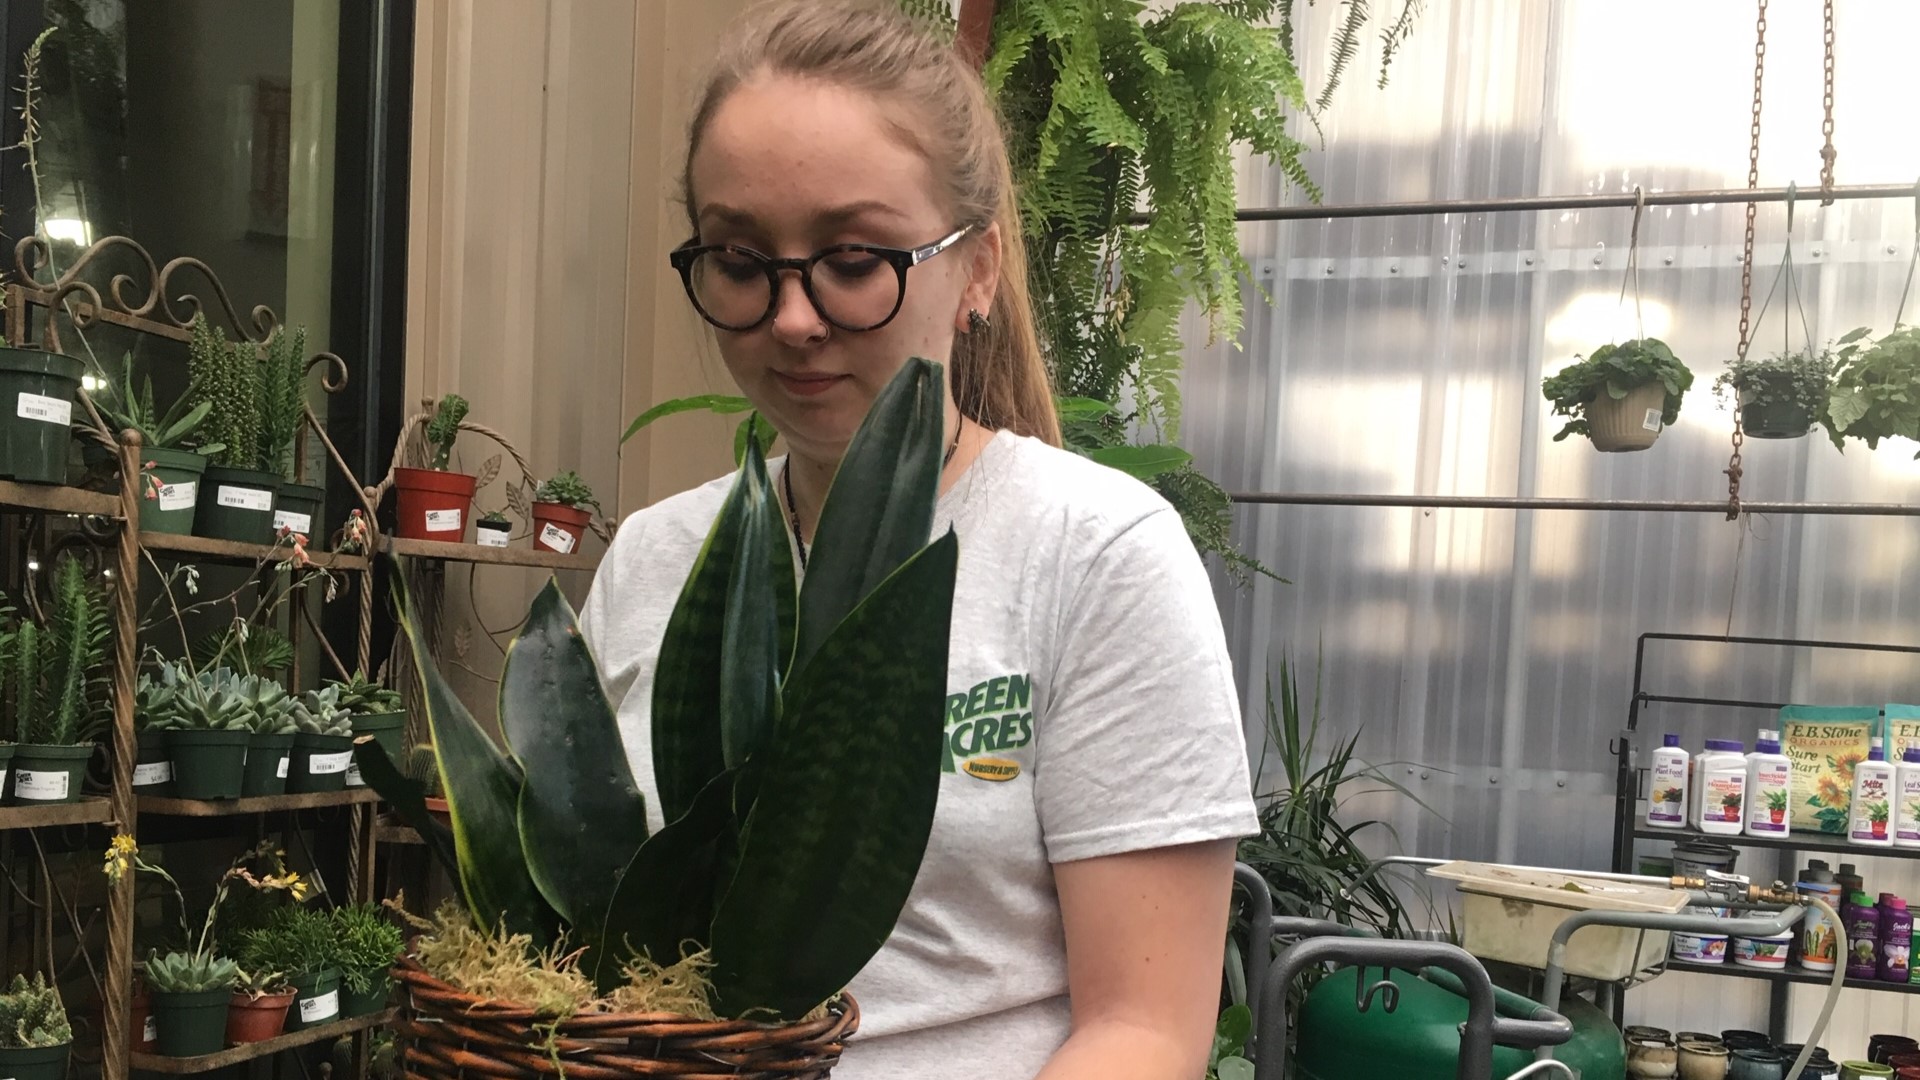 There are a growing number of people that have developed an affinity for indoor plants; so-called "Plant Parents." It's a trend that, in turn, is boosting business at local nurseries.